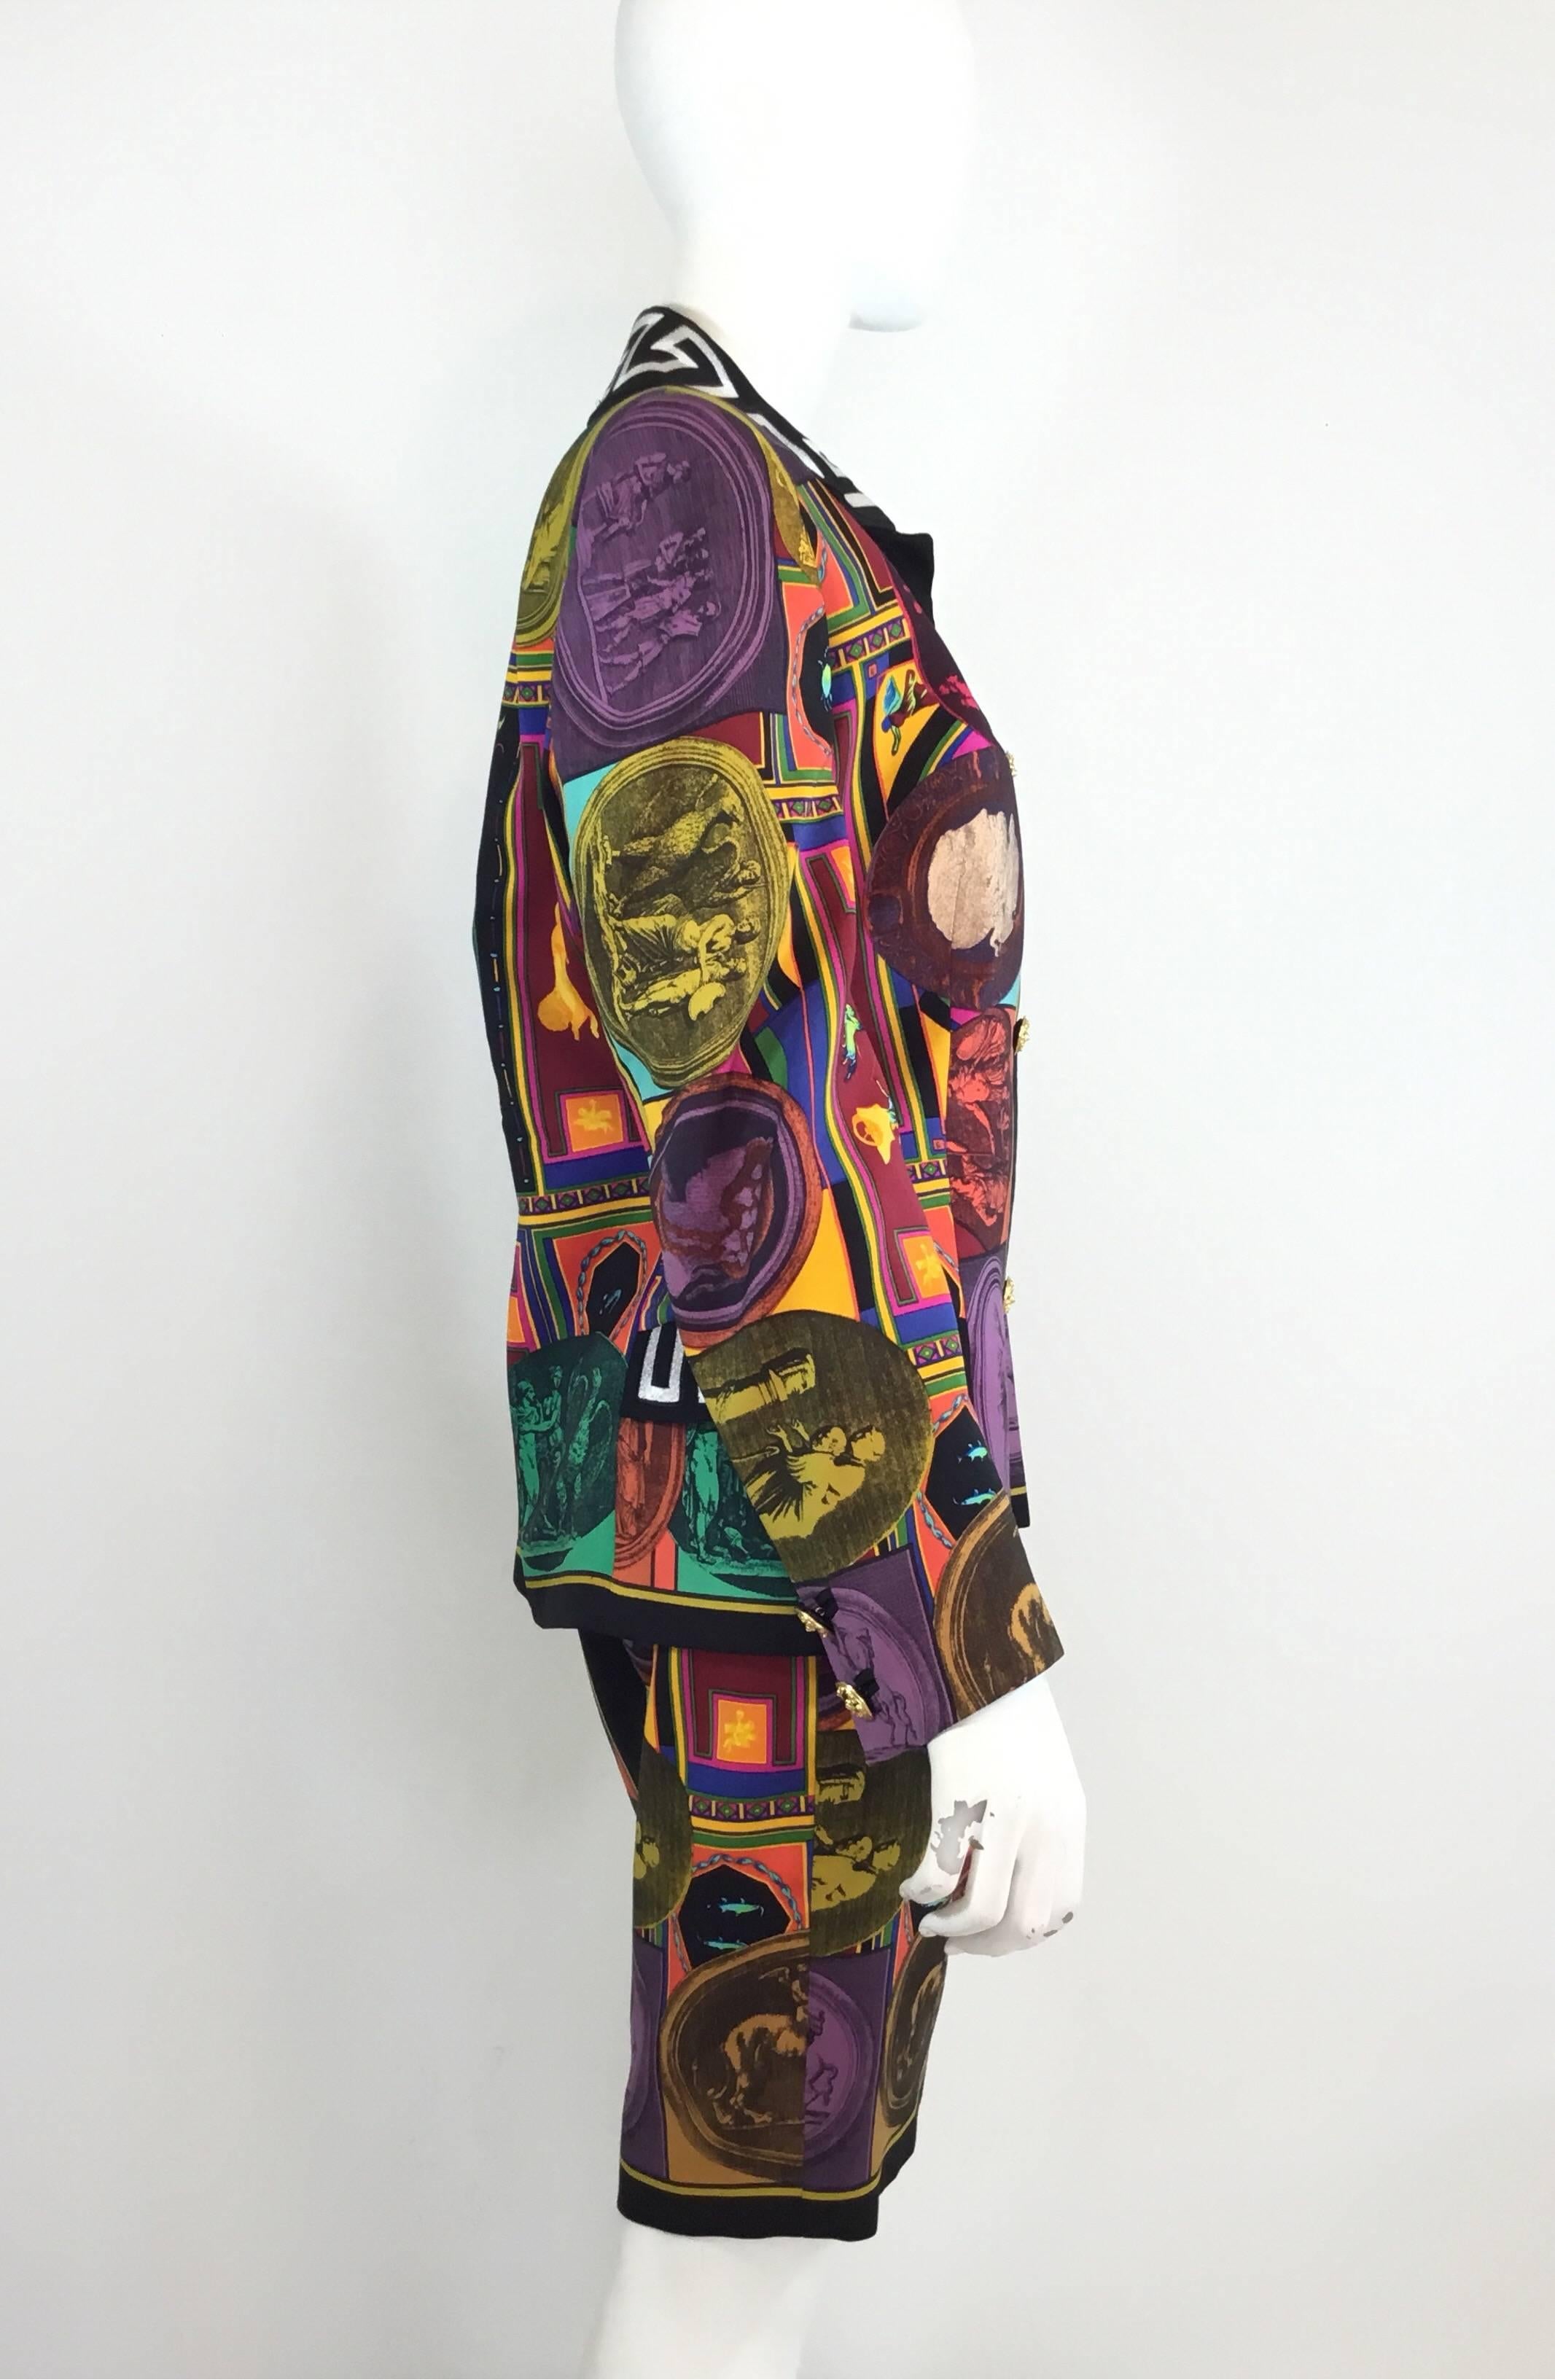 Vintage Gianni Versace skirt suit features a bright multicolored print throughout; Jacket has button closures at the front and on the sleeves, embroidered detail on the collar and on the flaps of the pockets at the waist. Skirt has a side zipper